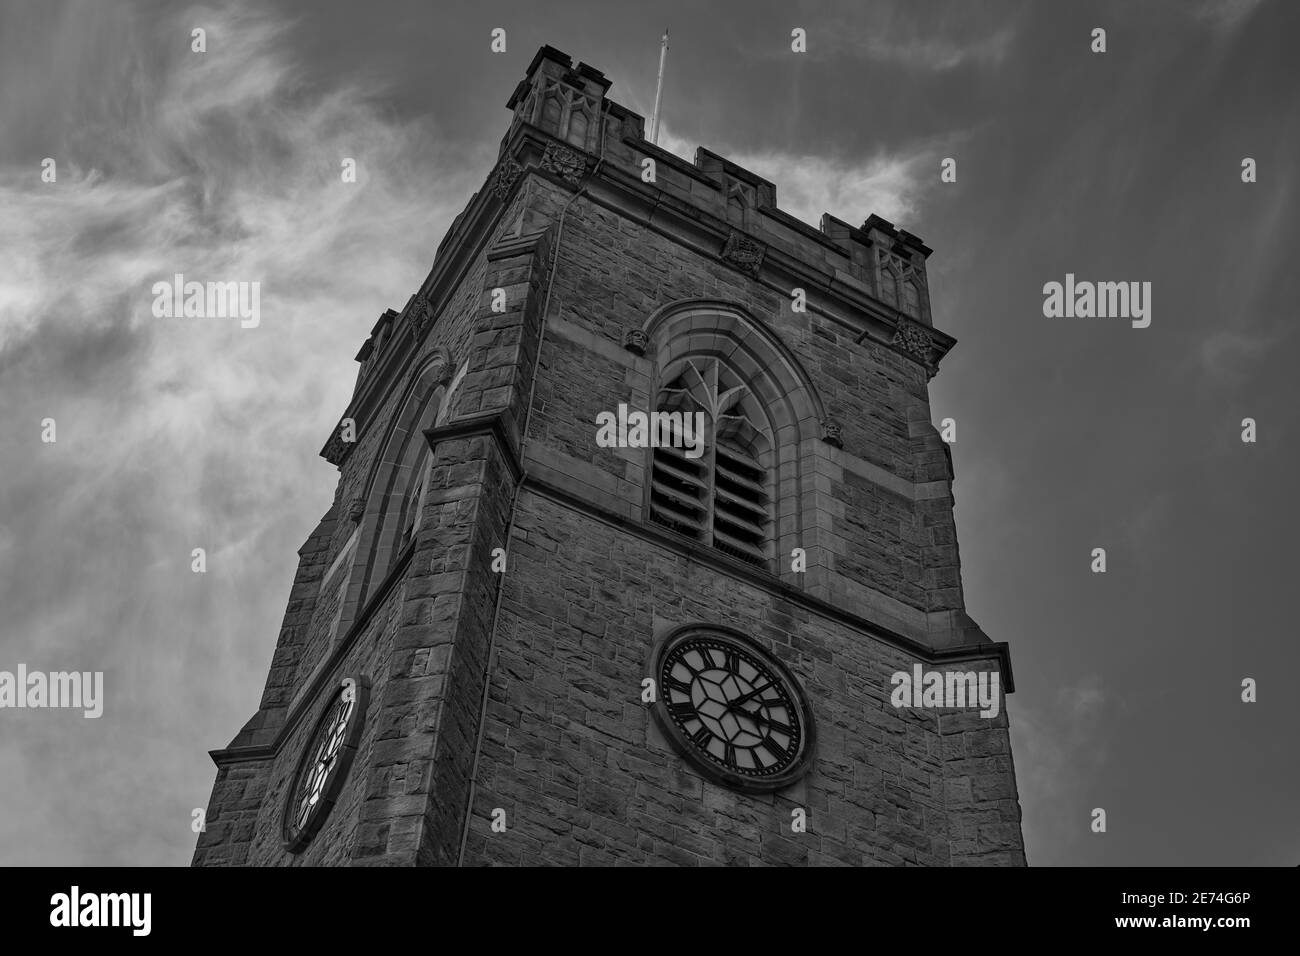 Church of England clock tower arched windows Stock Photo